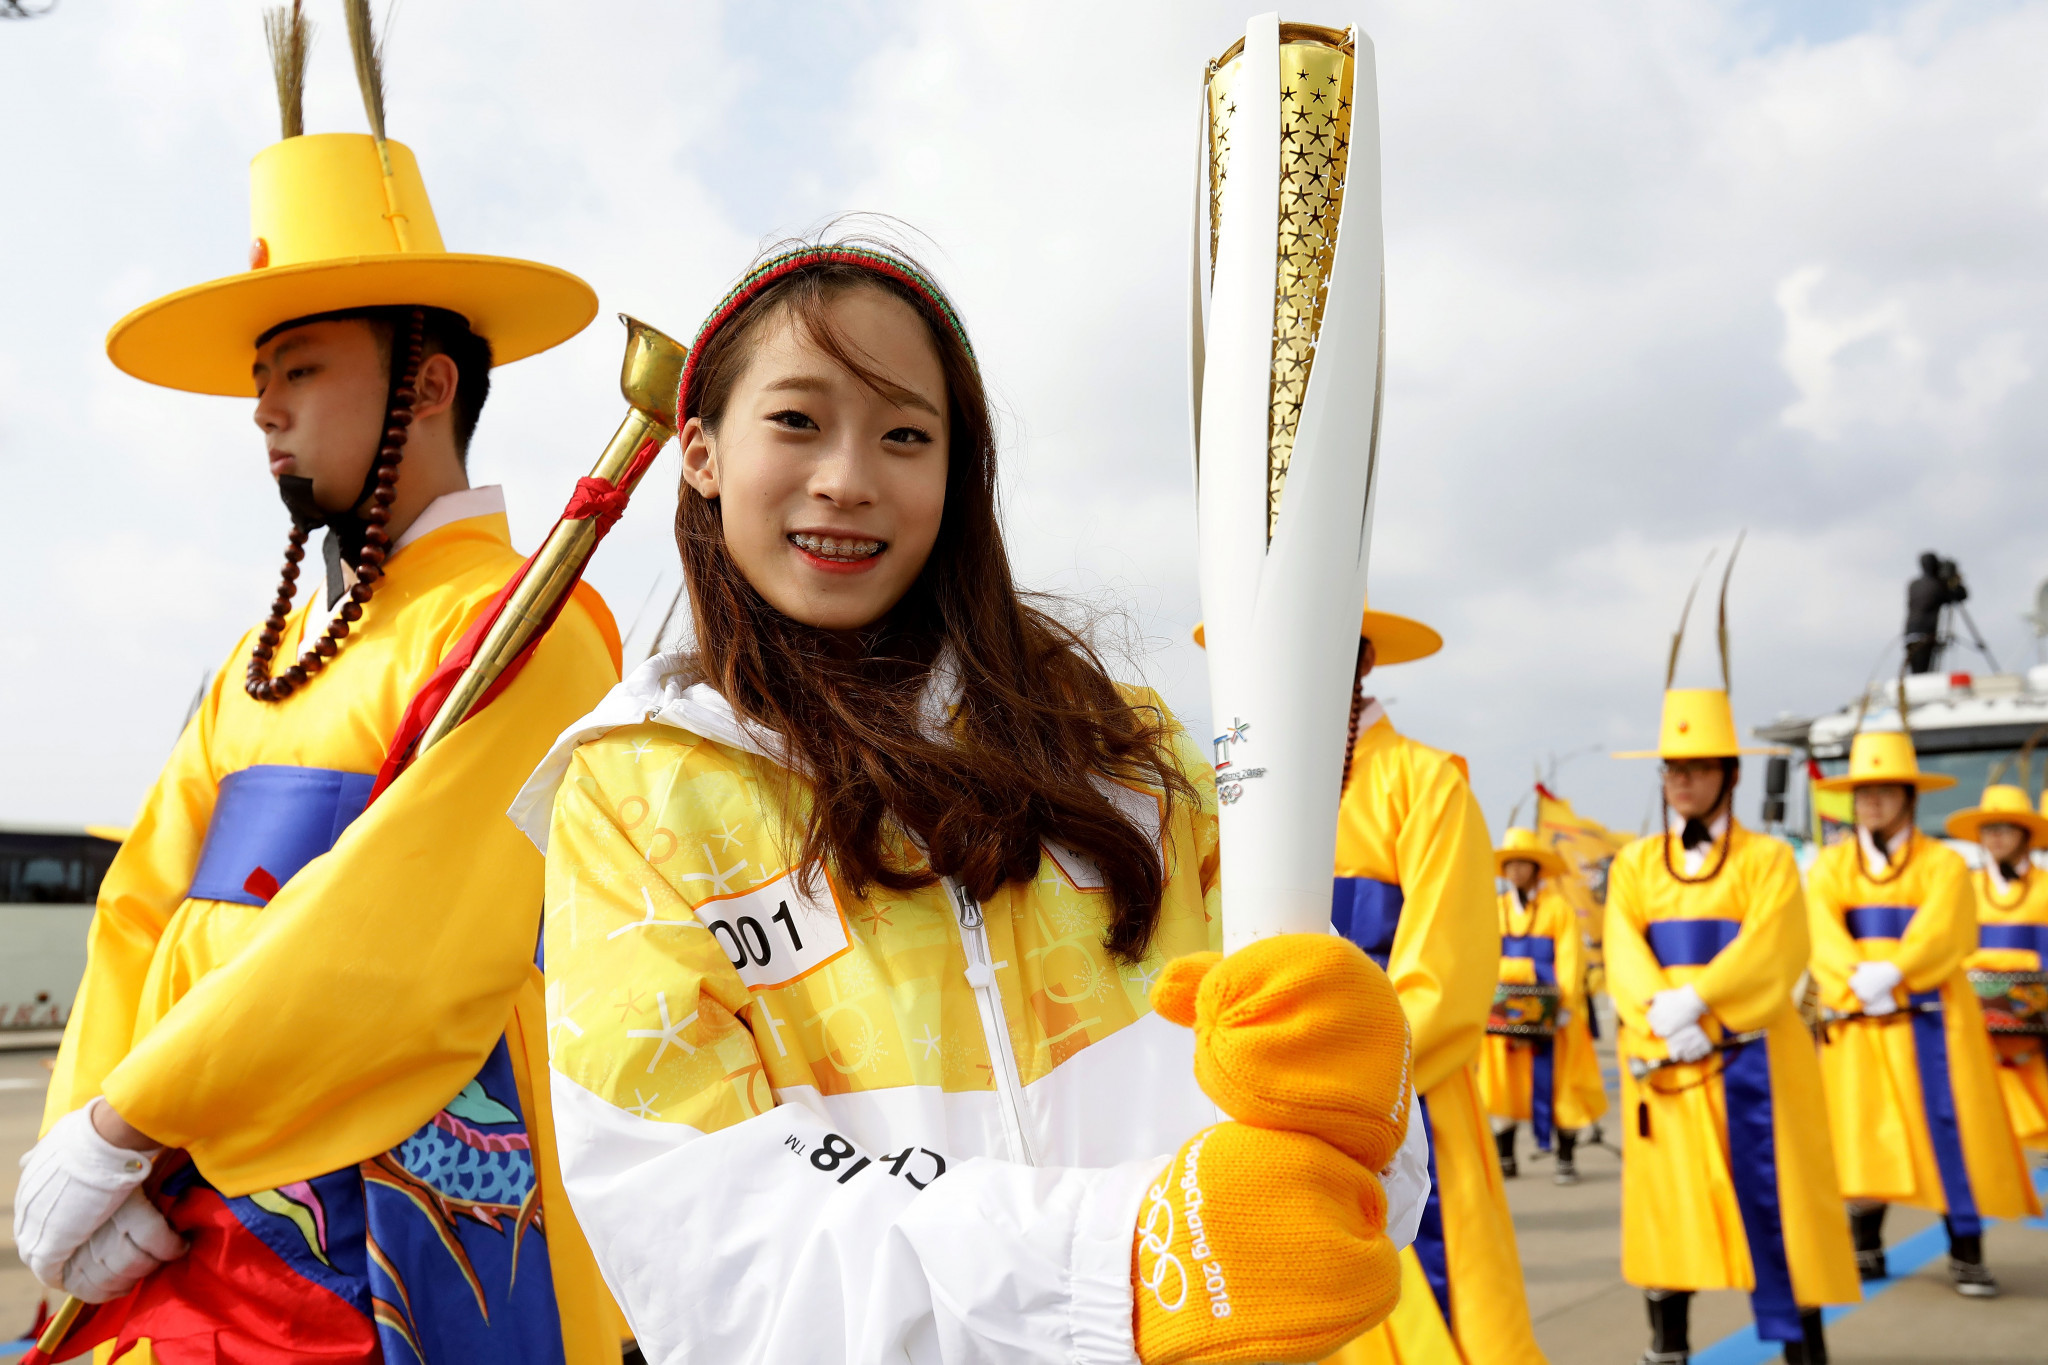 South Korean figure skater You Young holds the Pyeongchang 2018 Winter Olympics Torch during a Torch Relay in Incheon, South Korea ©Getty Images